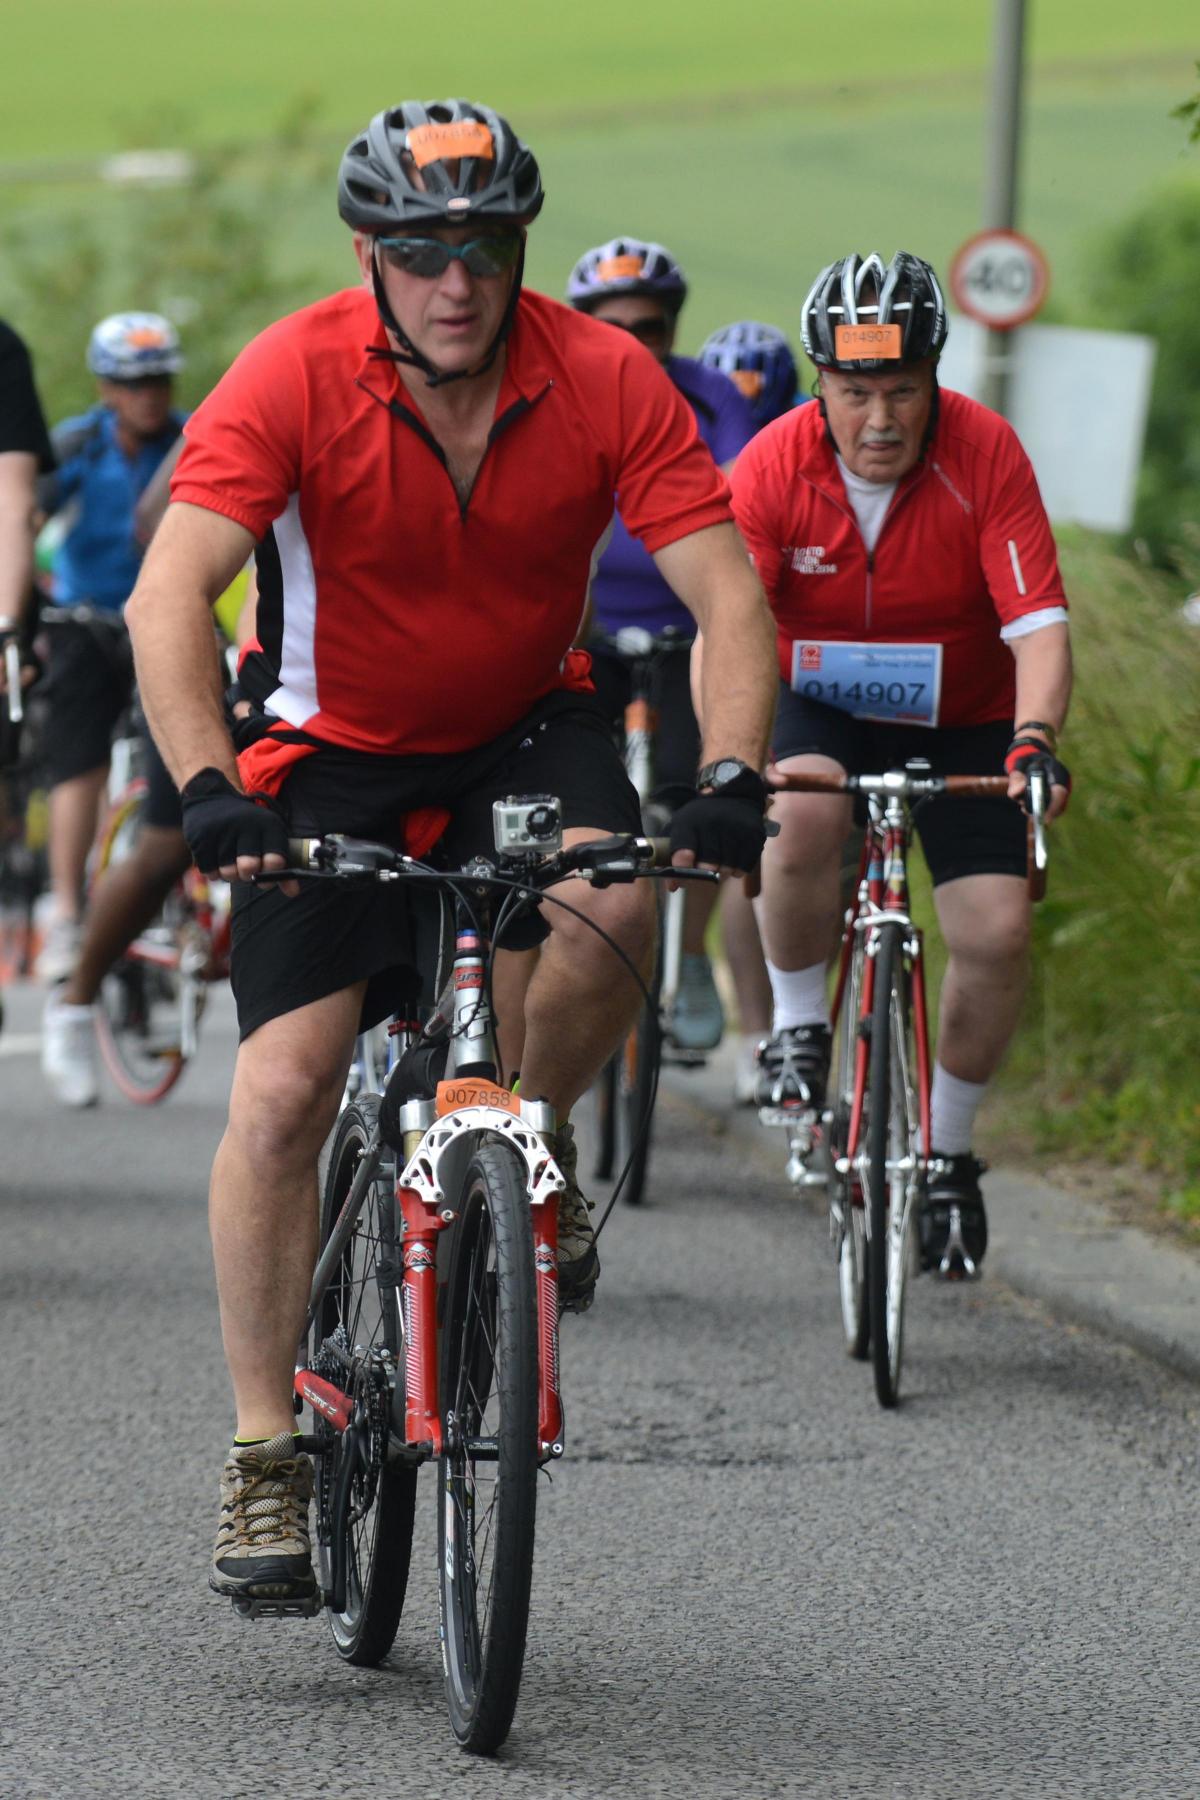 TENS of thousands of cyclists streamed across the South Downs this weekend as they took on a 54-mile charity cycle challenge.
Now in its 39th year, The London to Brighton Bike Ride is the oldest and largest charity ride in Europe – having raised £60 m